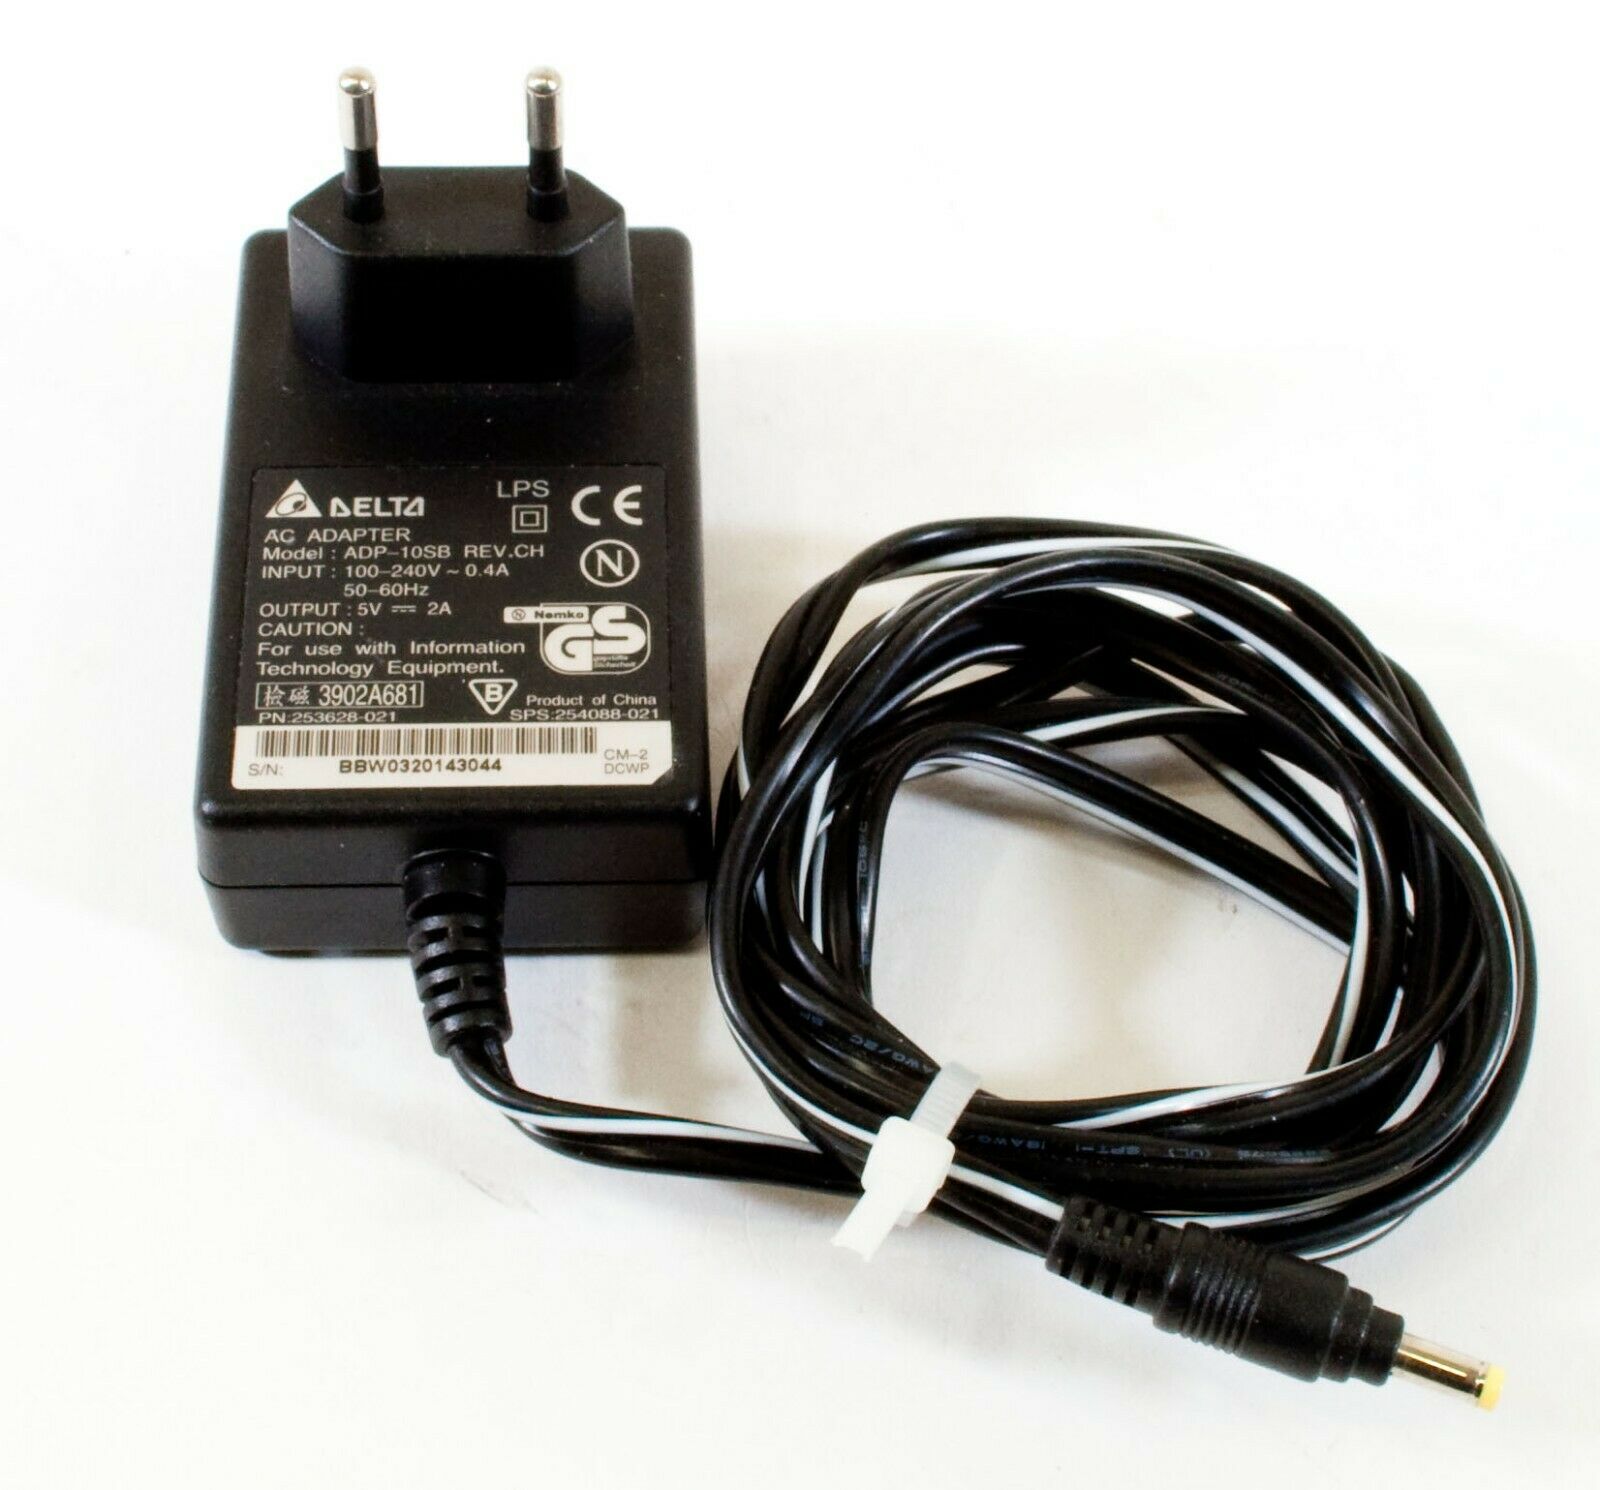 *Brand NEW*Original Charger Power Supply Europlug H252 Delta ADP-10SB 5V 2A AC Adapter